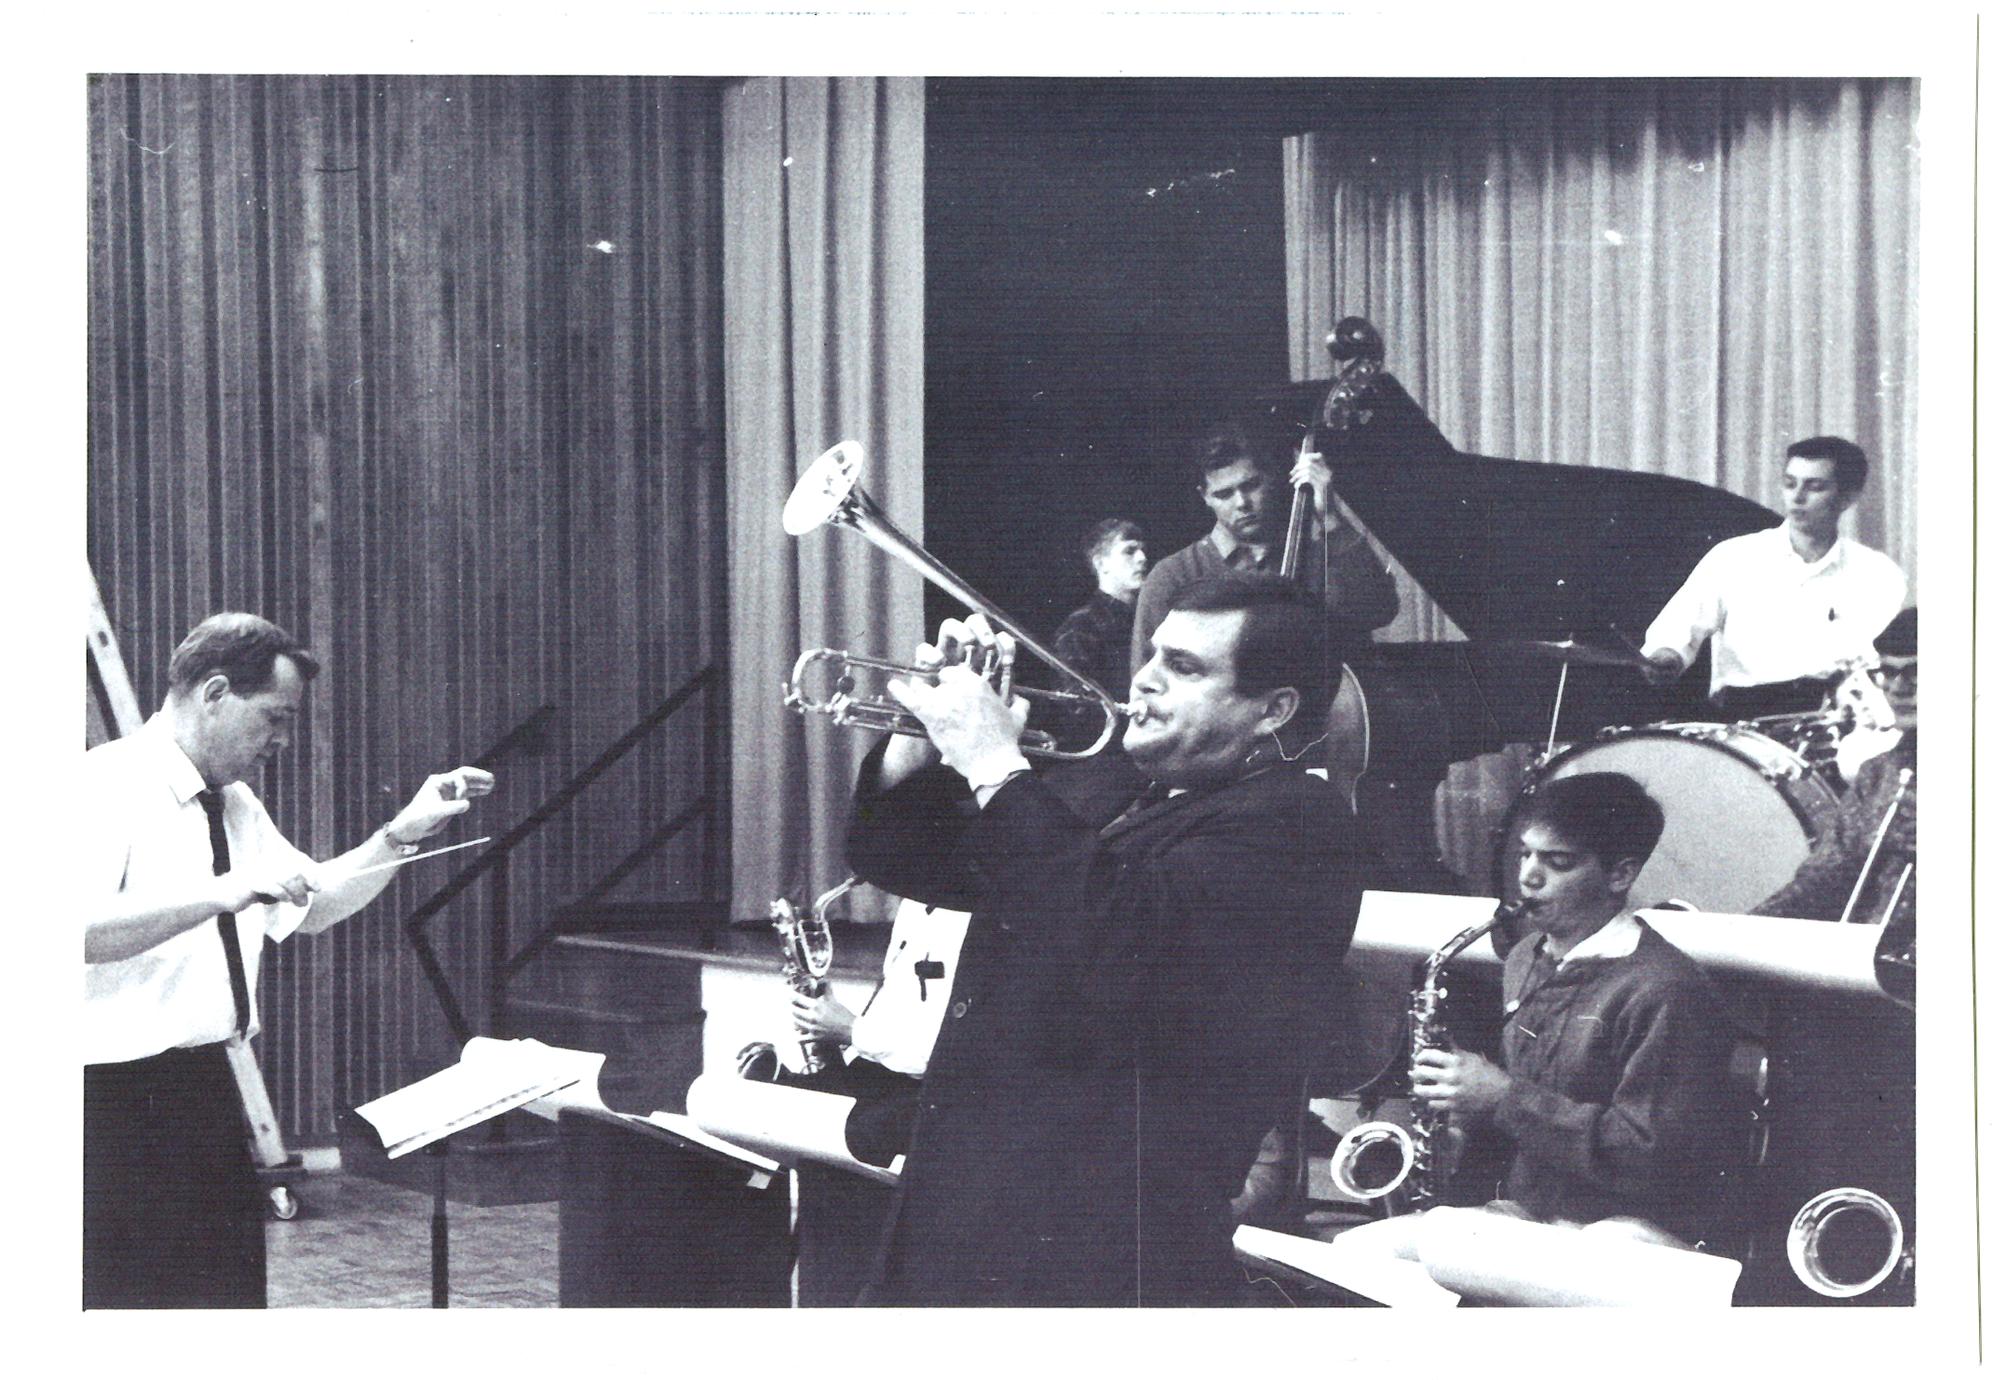 Dick Ruedebusch in rehearsal